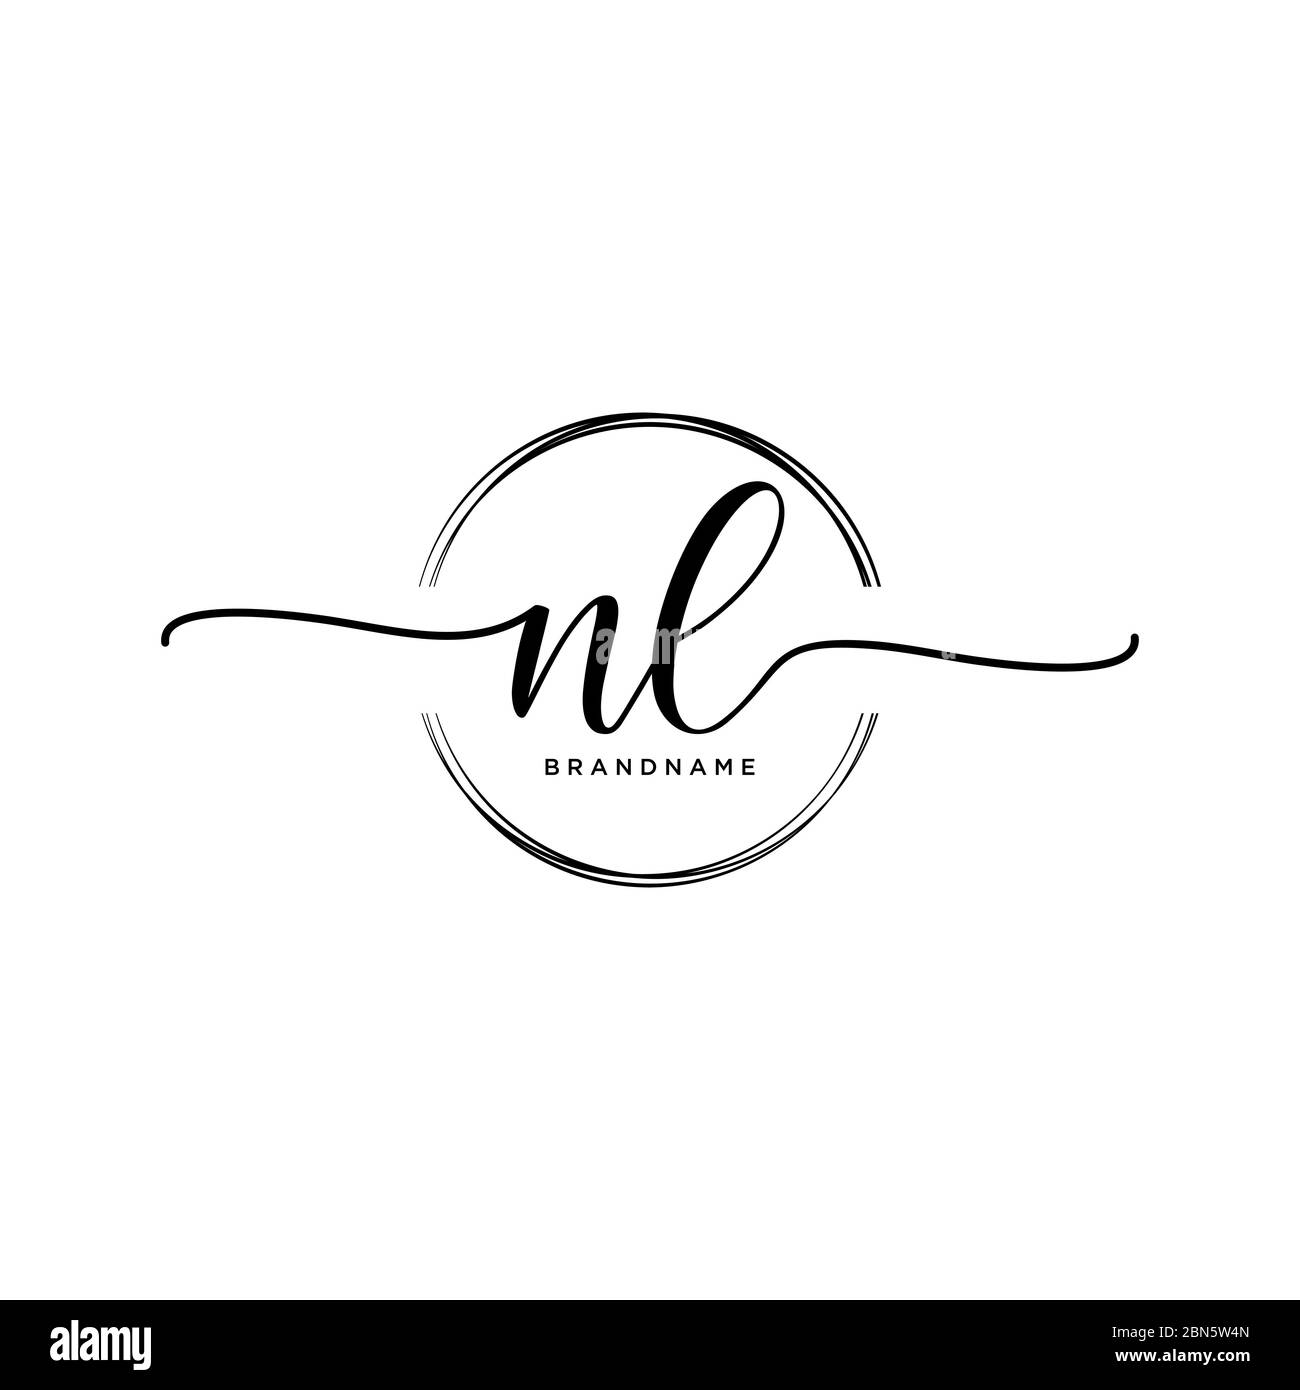 Nl Letter Logo High Resolution Stock Photography and Images - Alamy